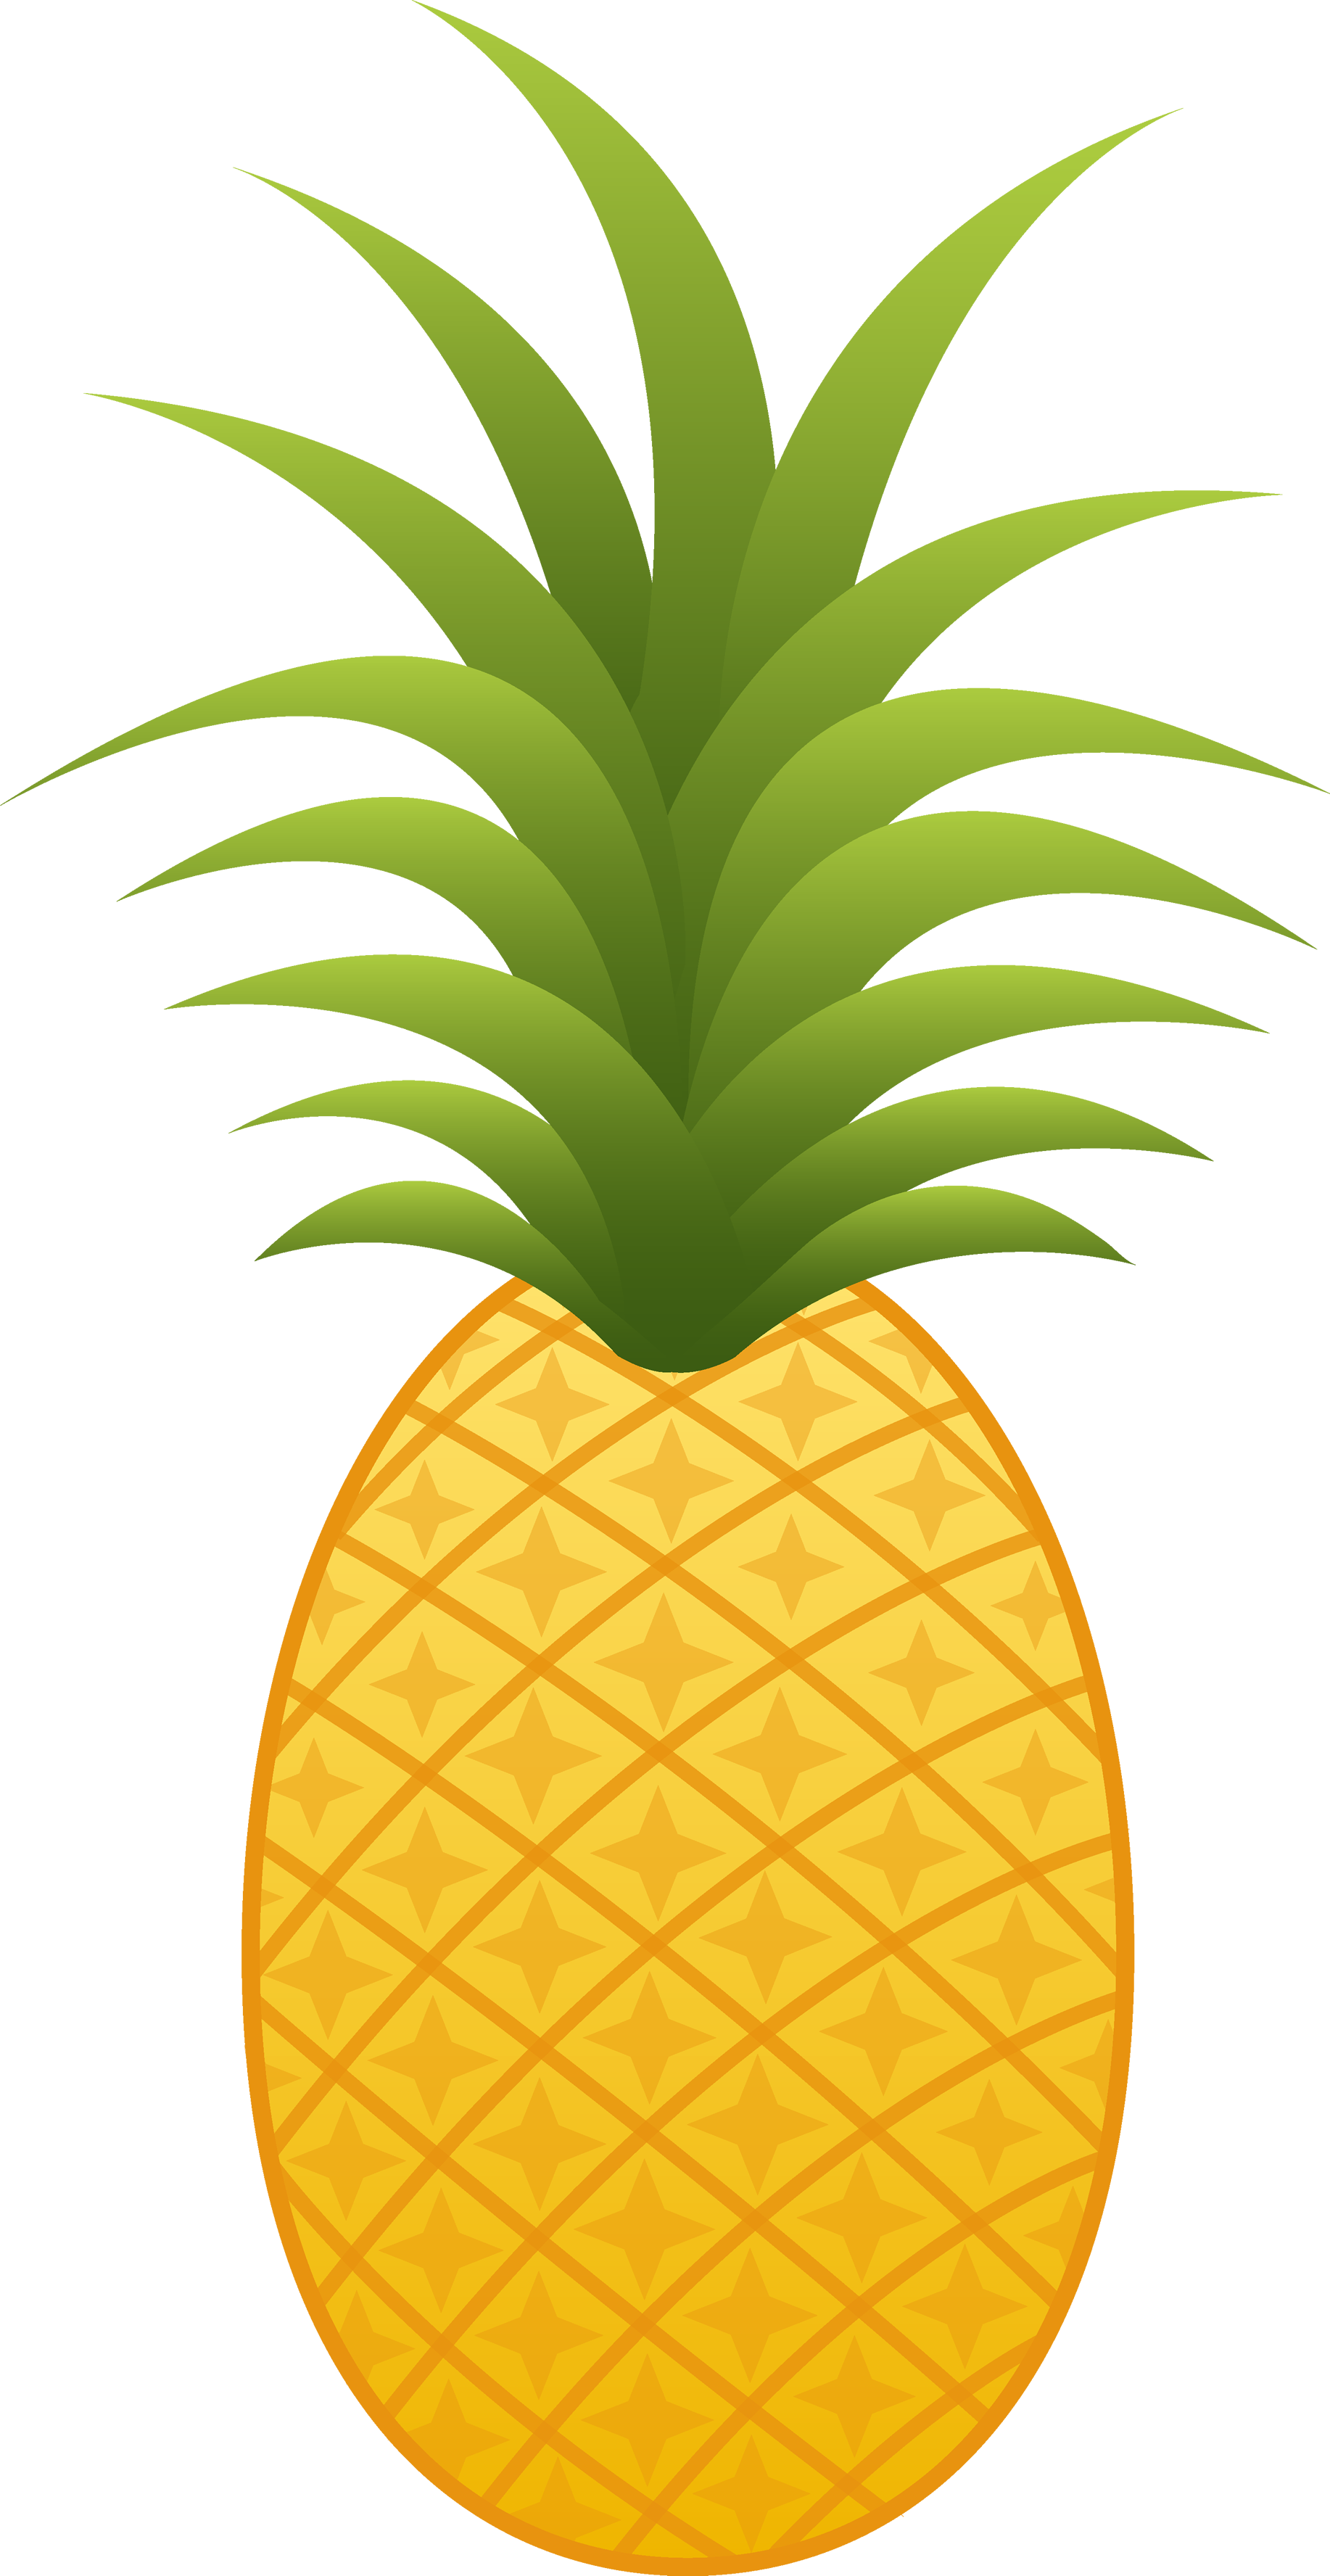 Pineapple images free pictures download 3